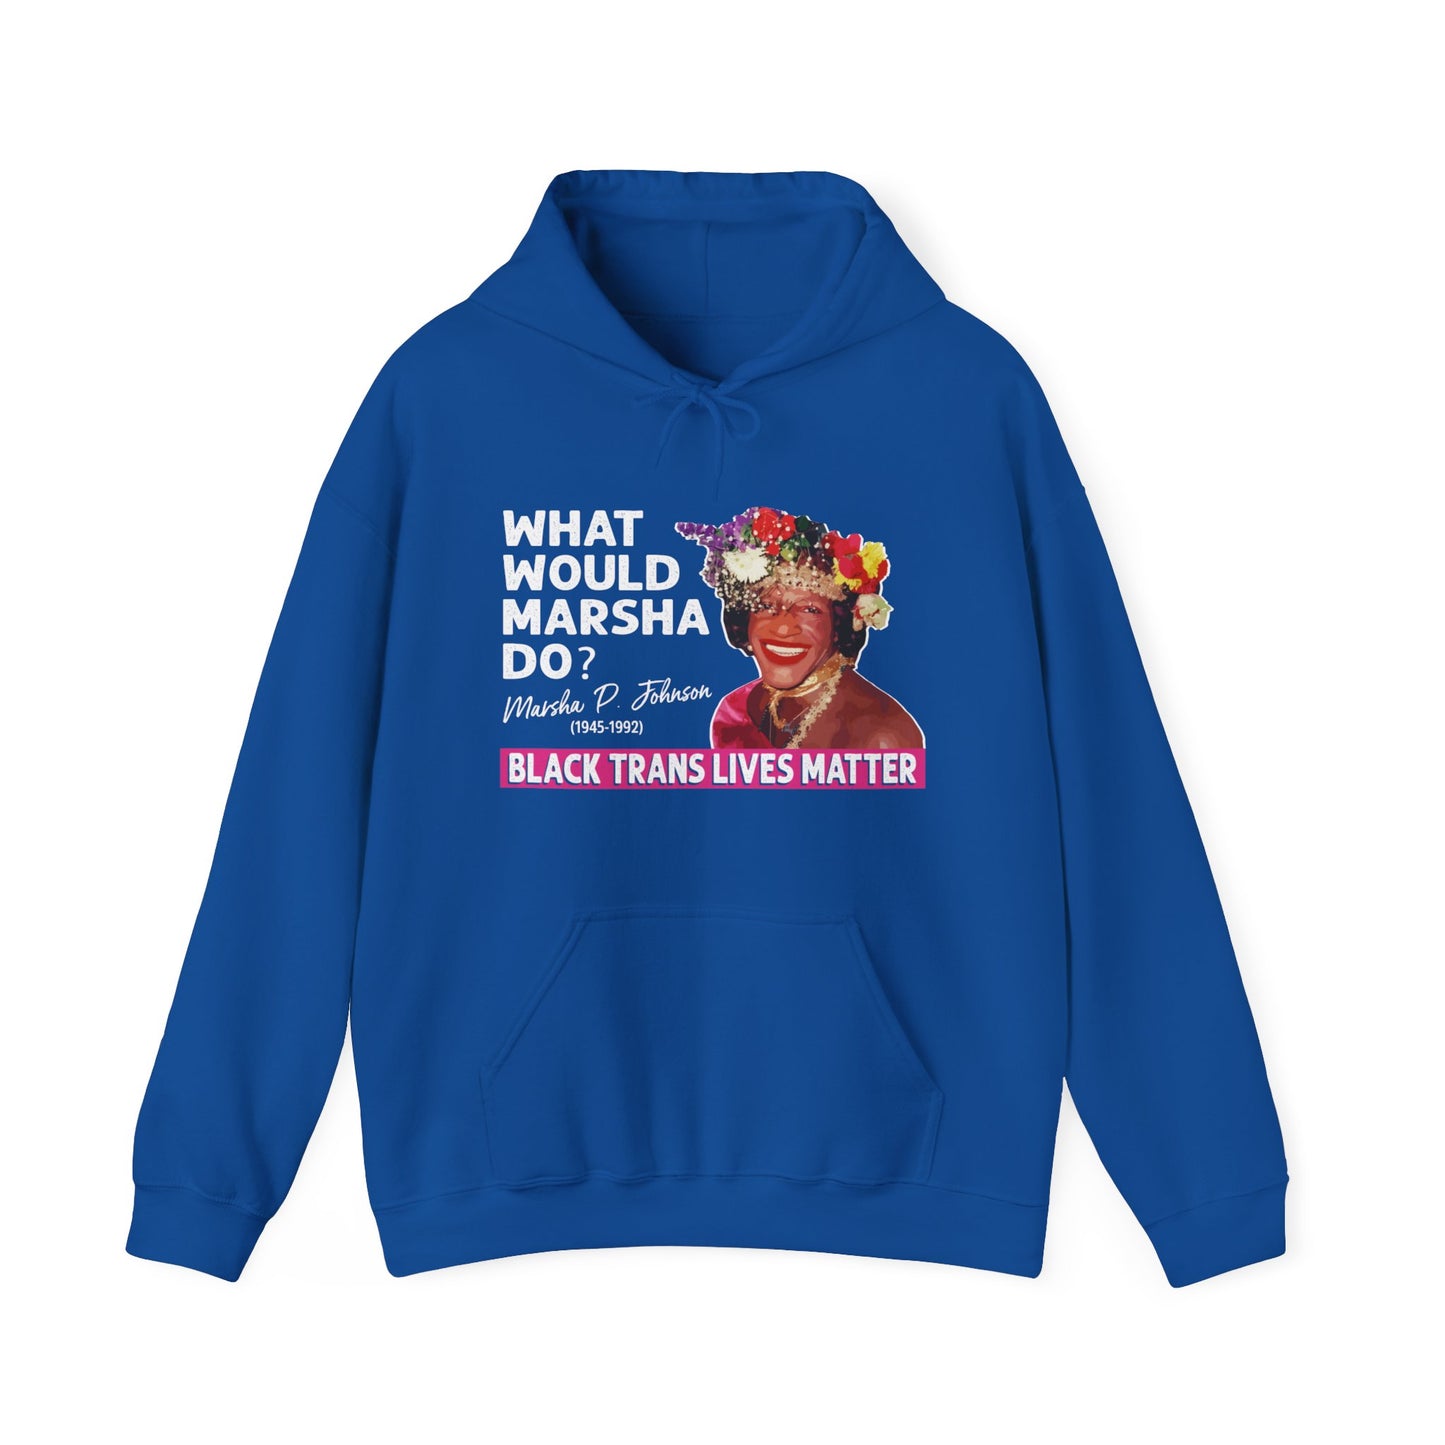 “What Would Marsha Do?” Unisex Hoodie